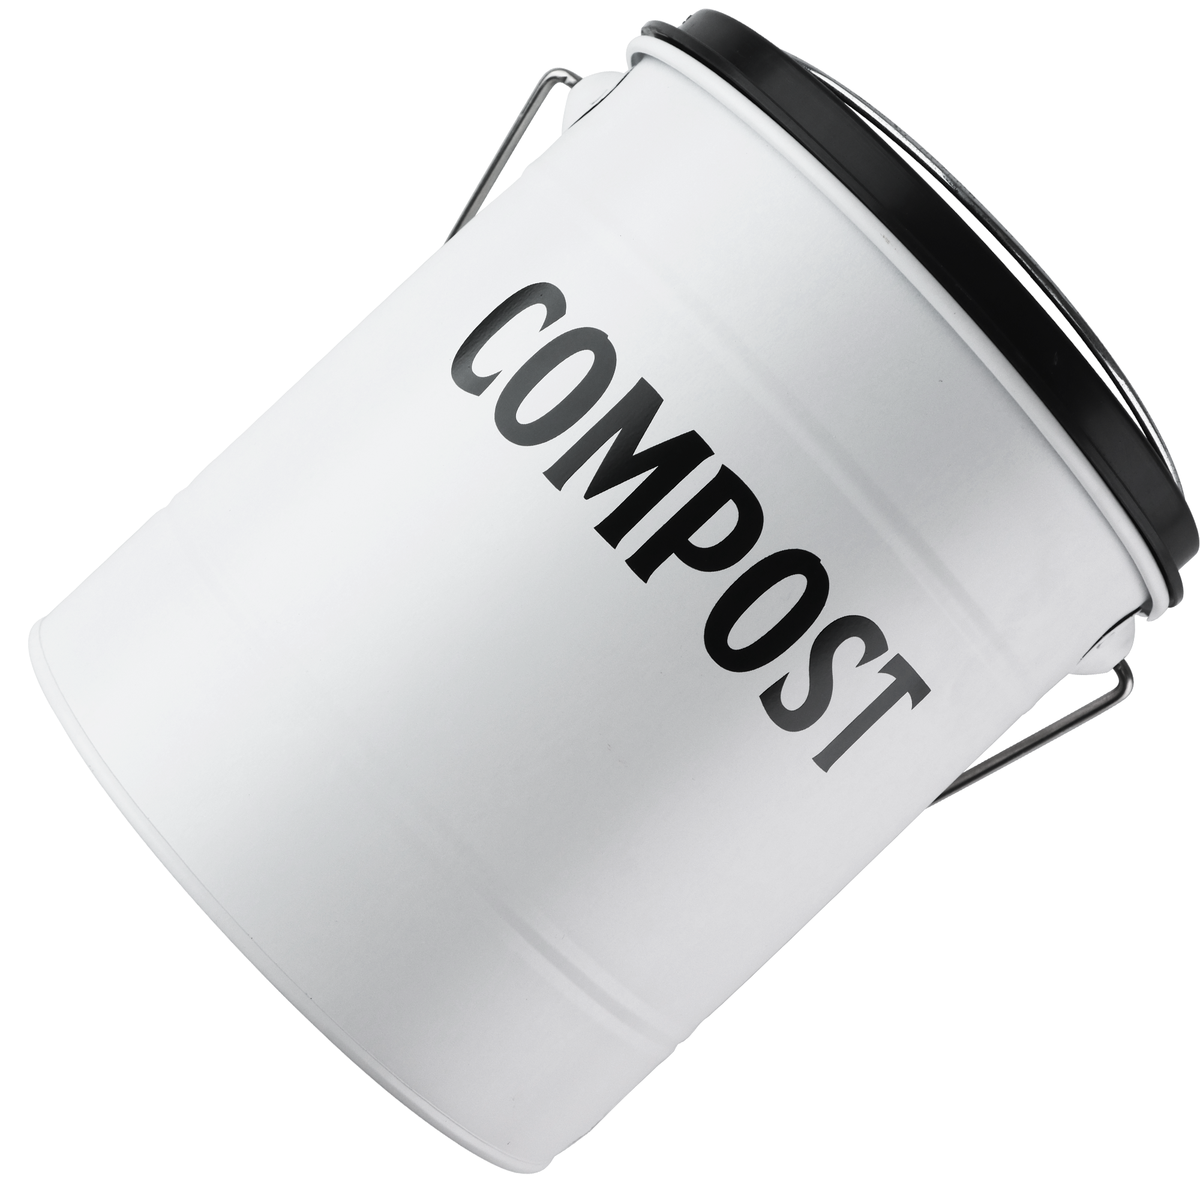 White Compost Bin side view without the lid